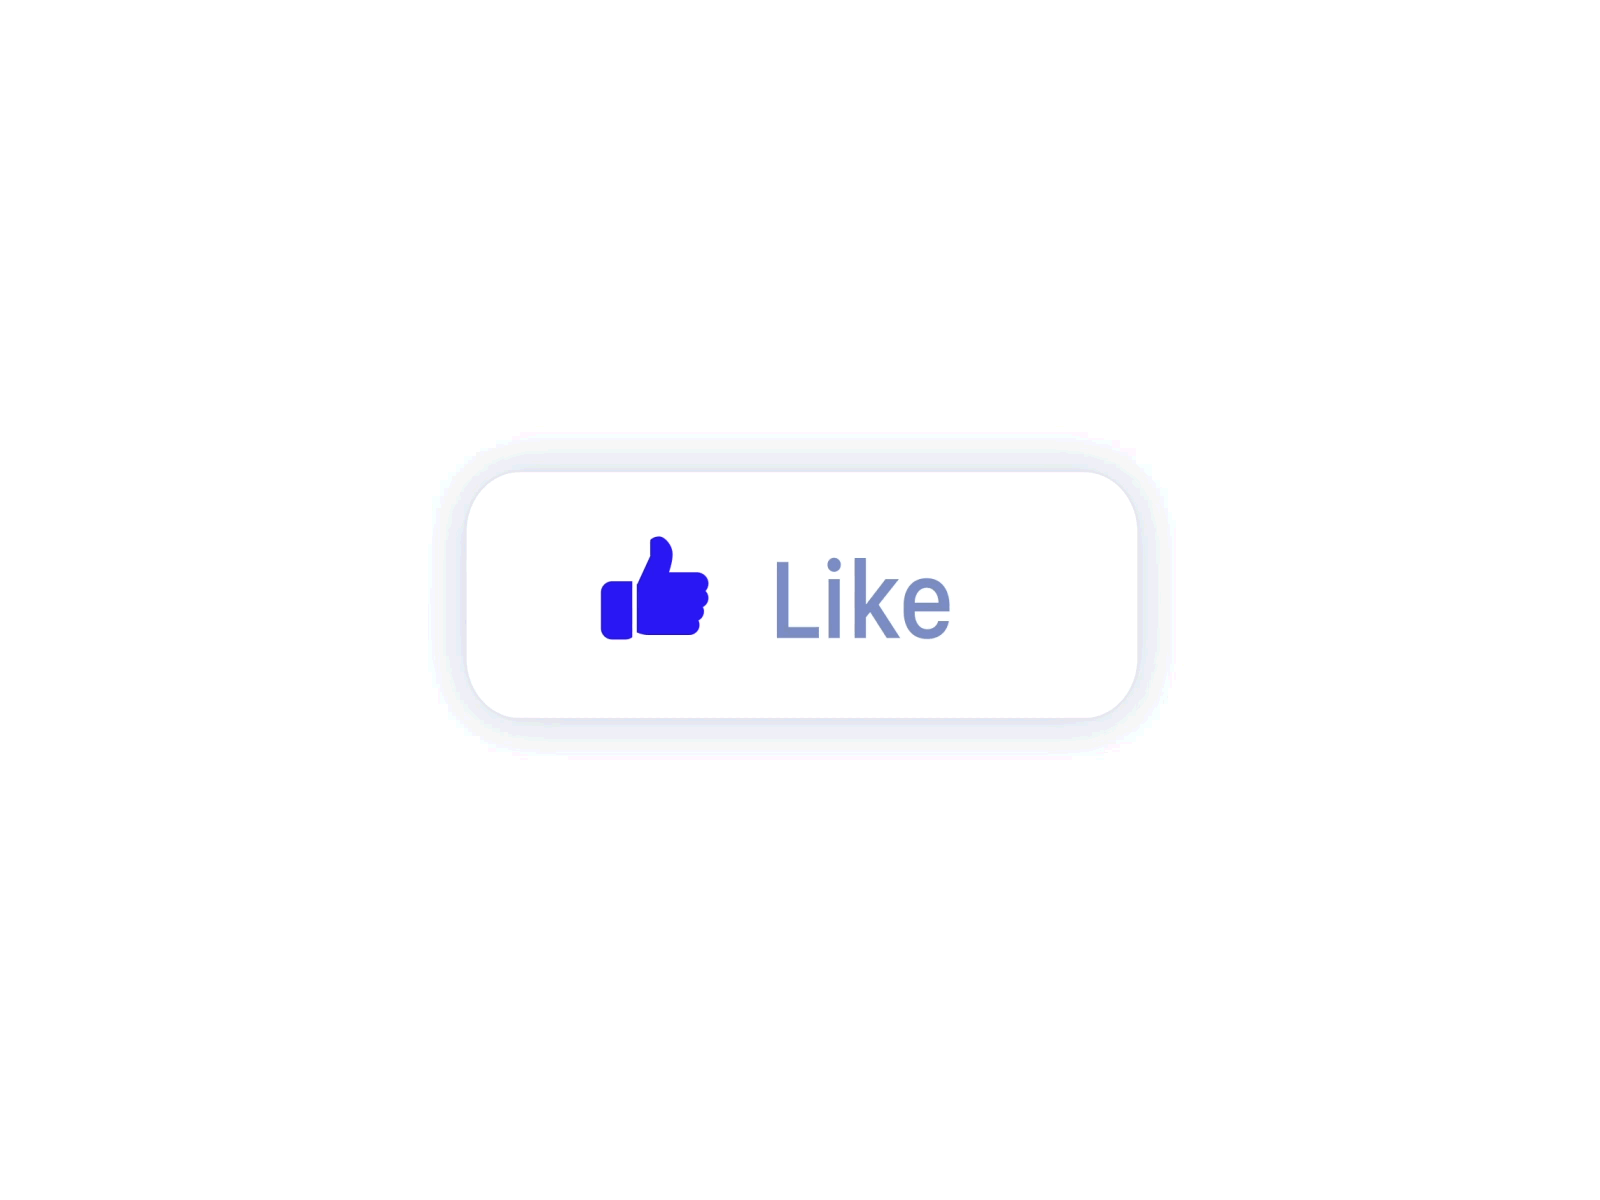 Thumbs Up Animation animation interaction design like button microinteraction mobile ui uianimation